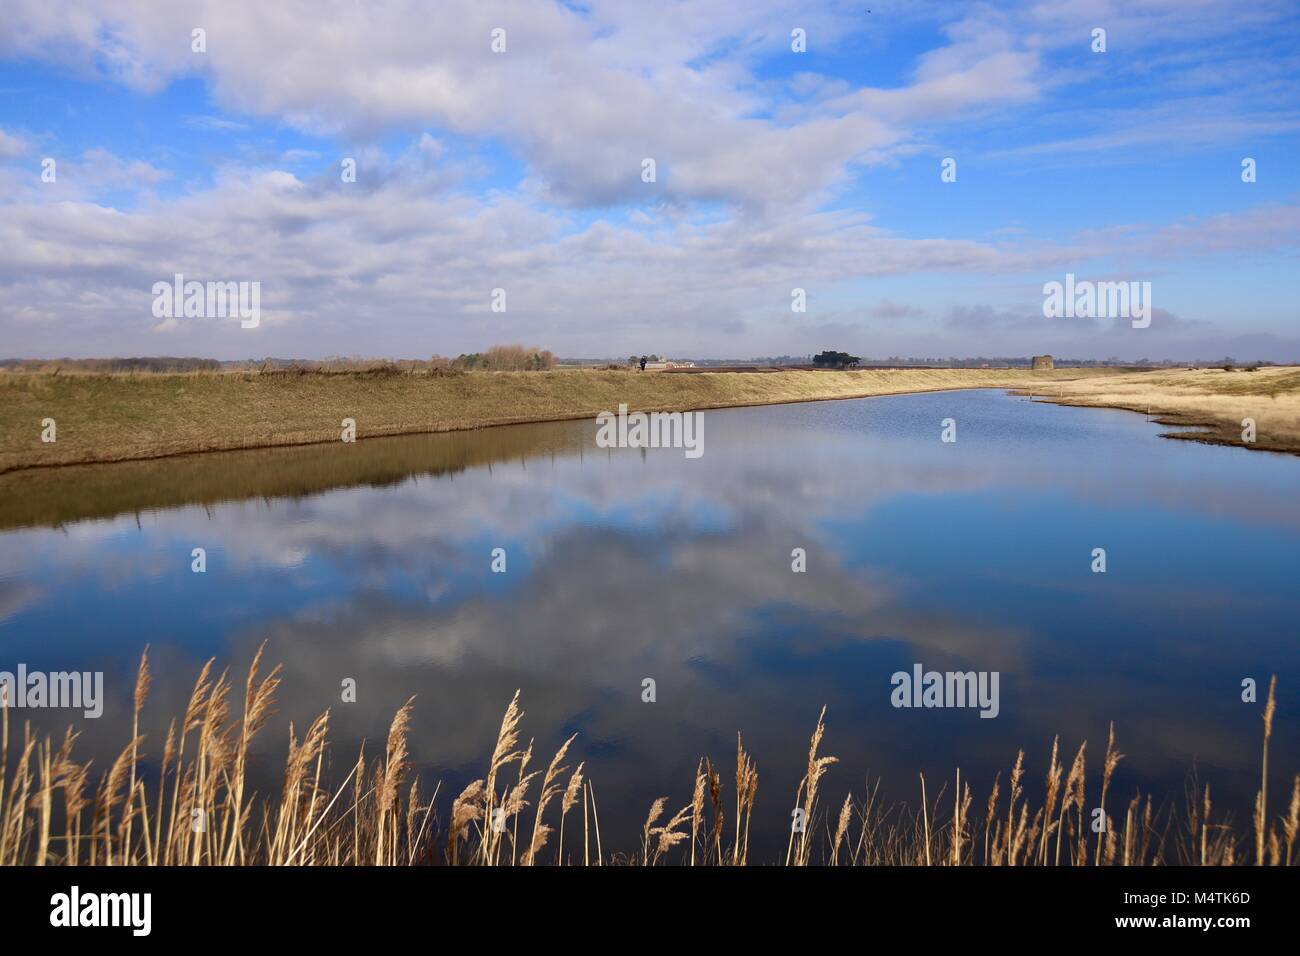 Golden banks around a reflecting lagoon by the North Sea at Bawdsey, Suffolk. Stock Photo